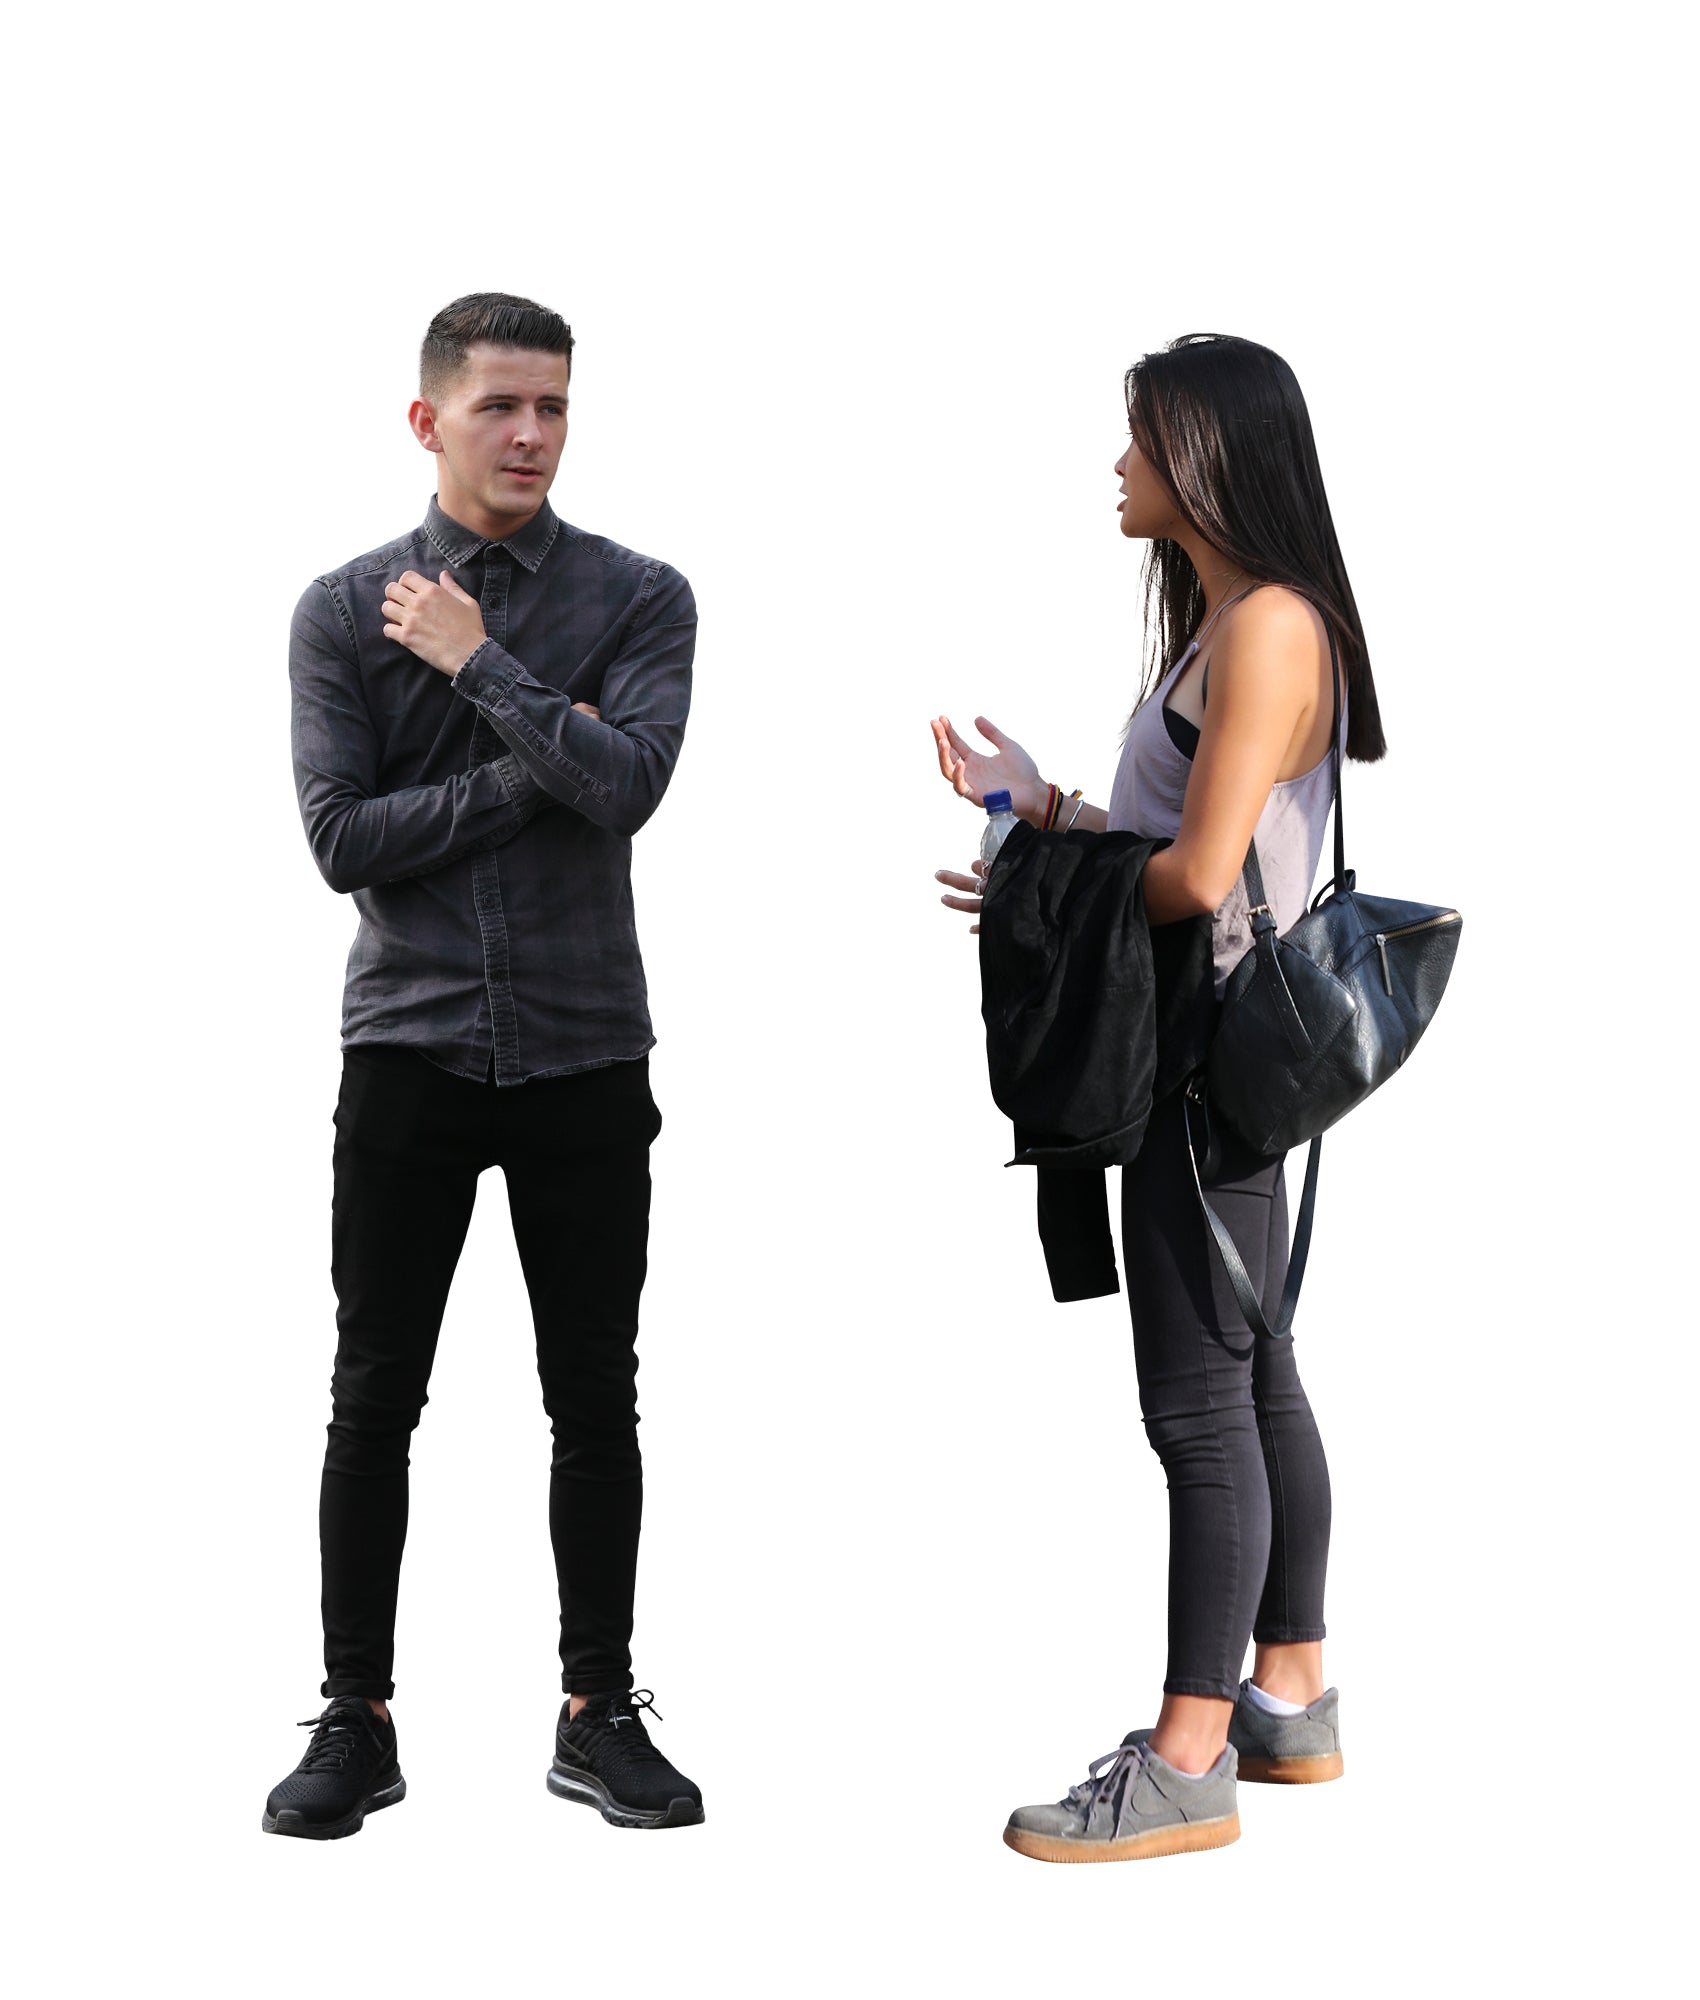 Cutout People Special - 1200 cutouts